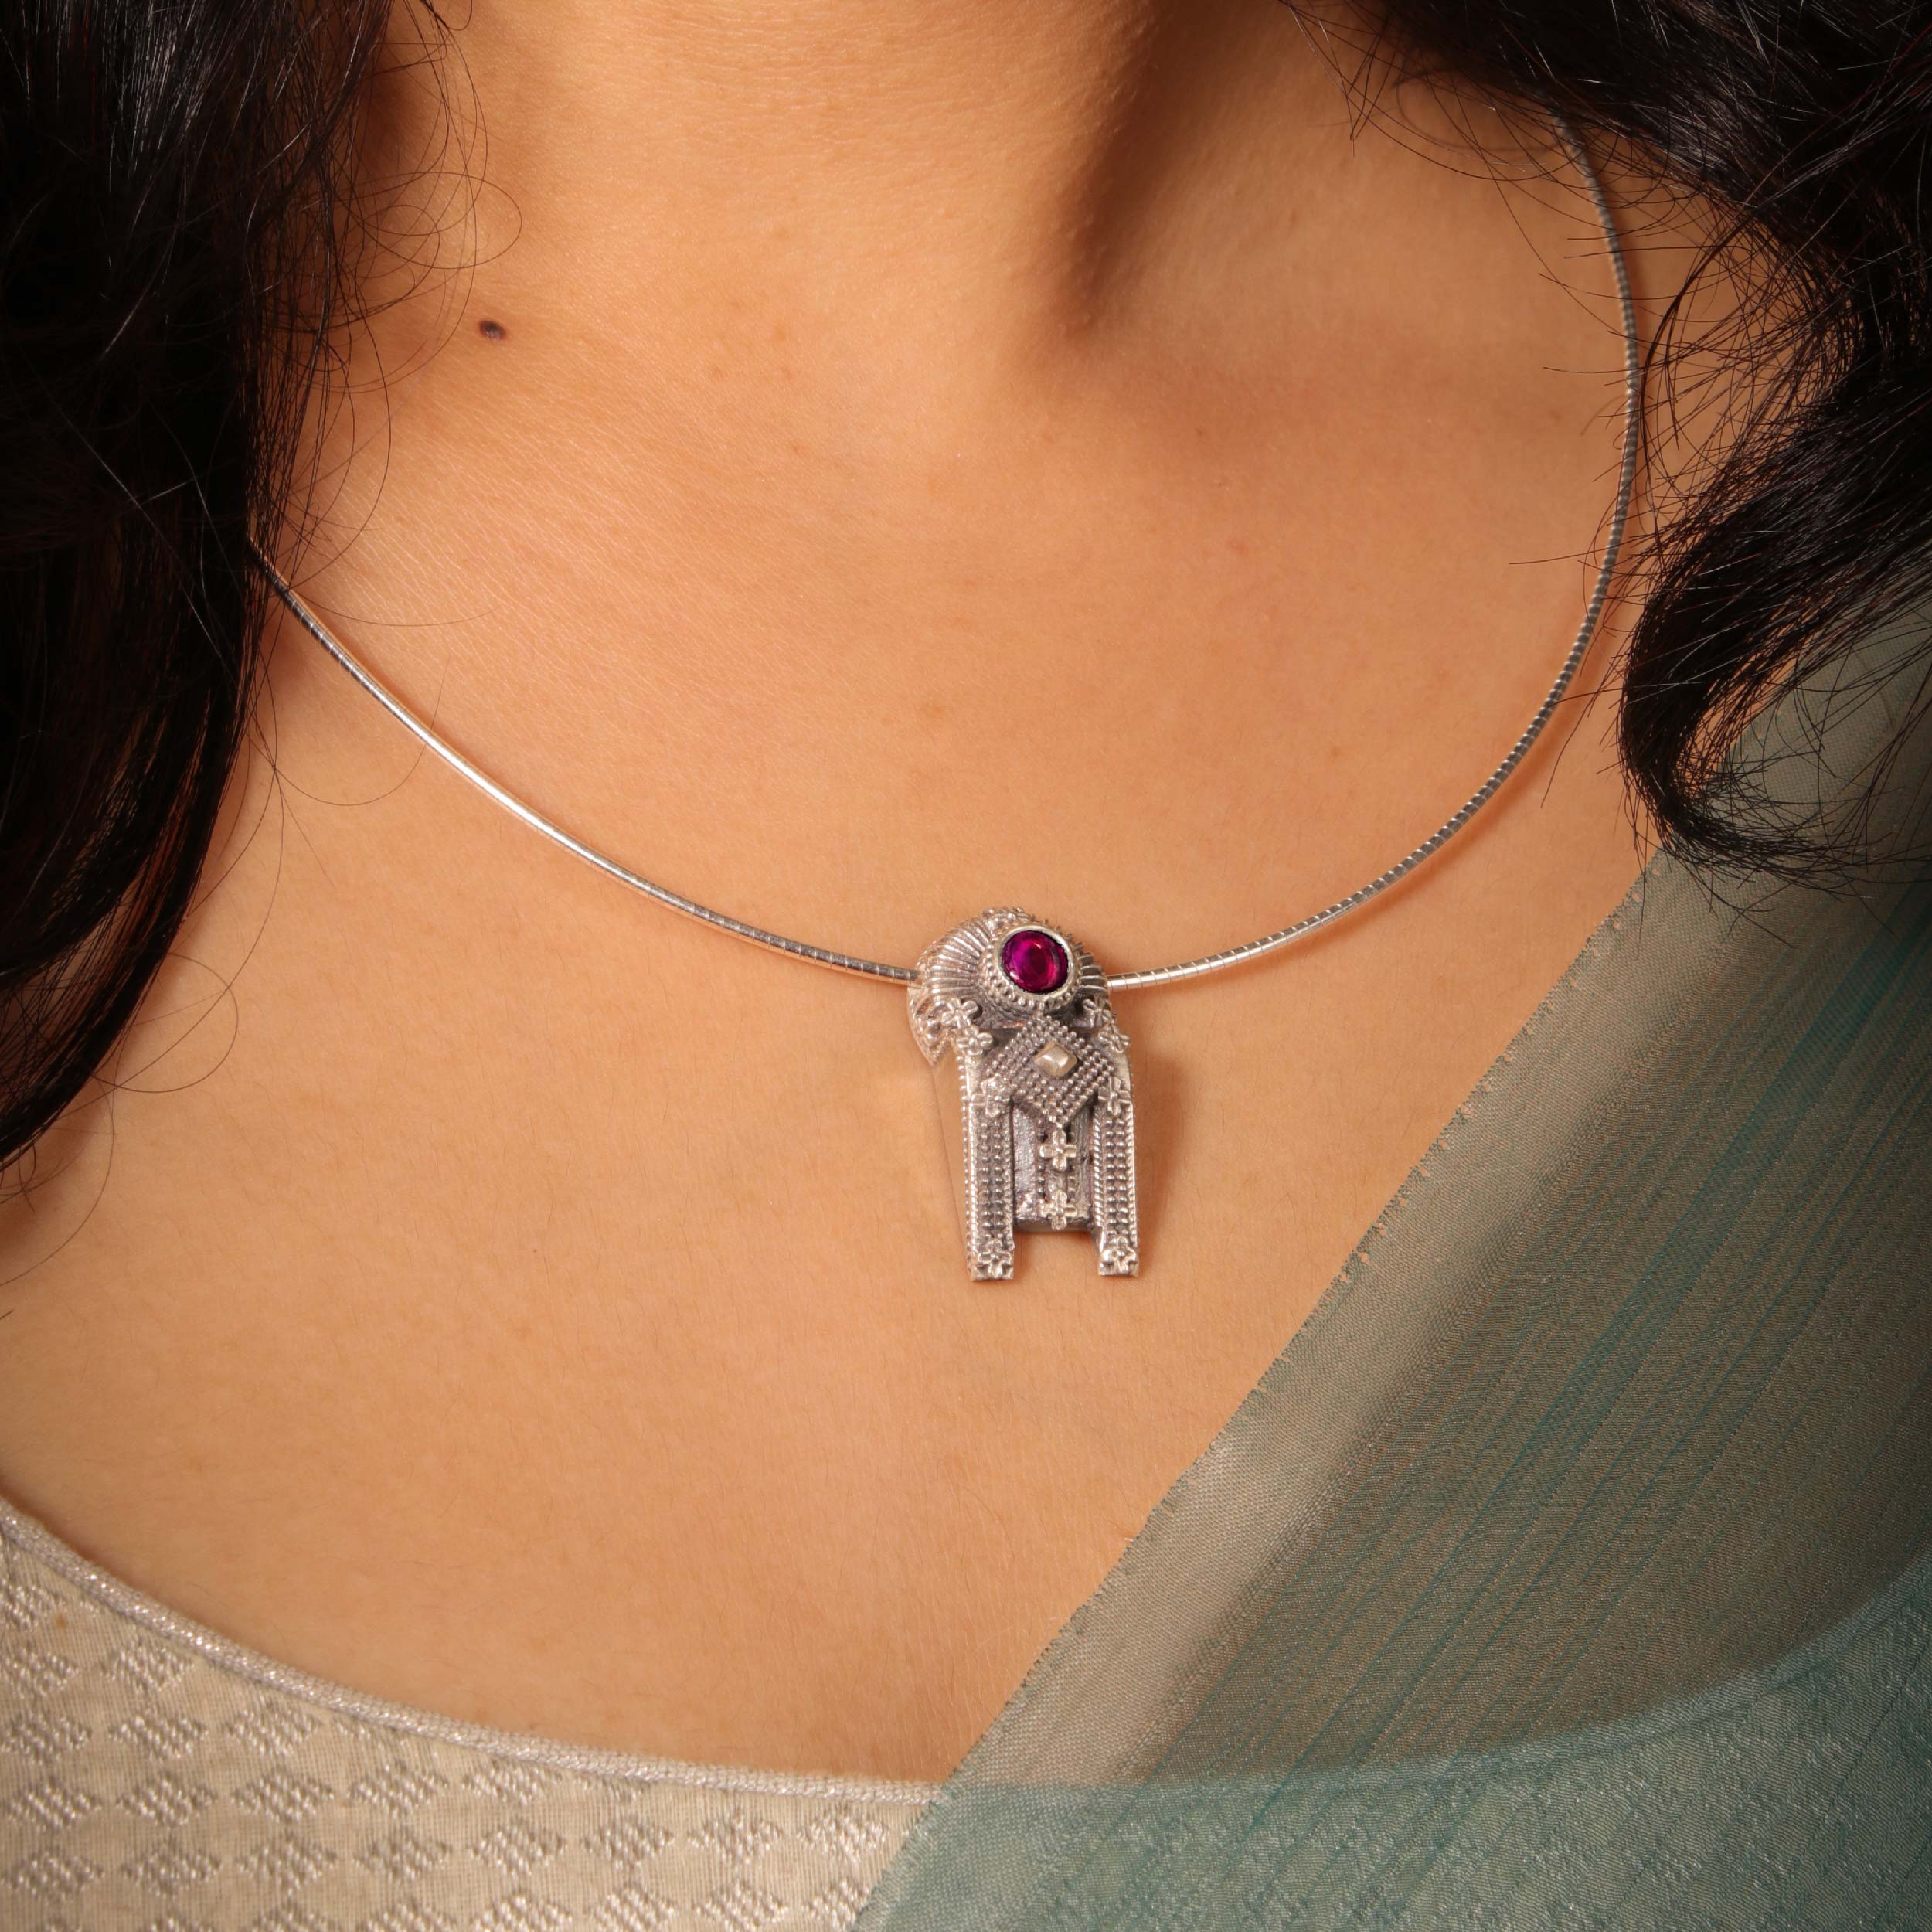 Thoppa Taali Silver Pendant Chain With Rubellite Stone by MOHA